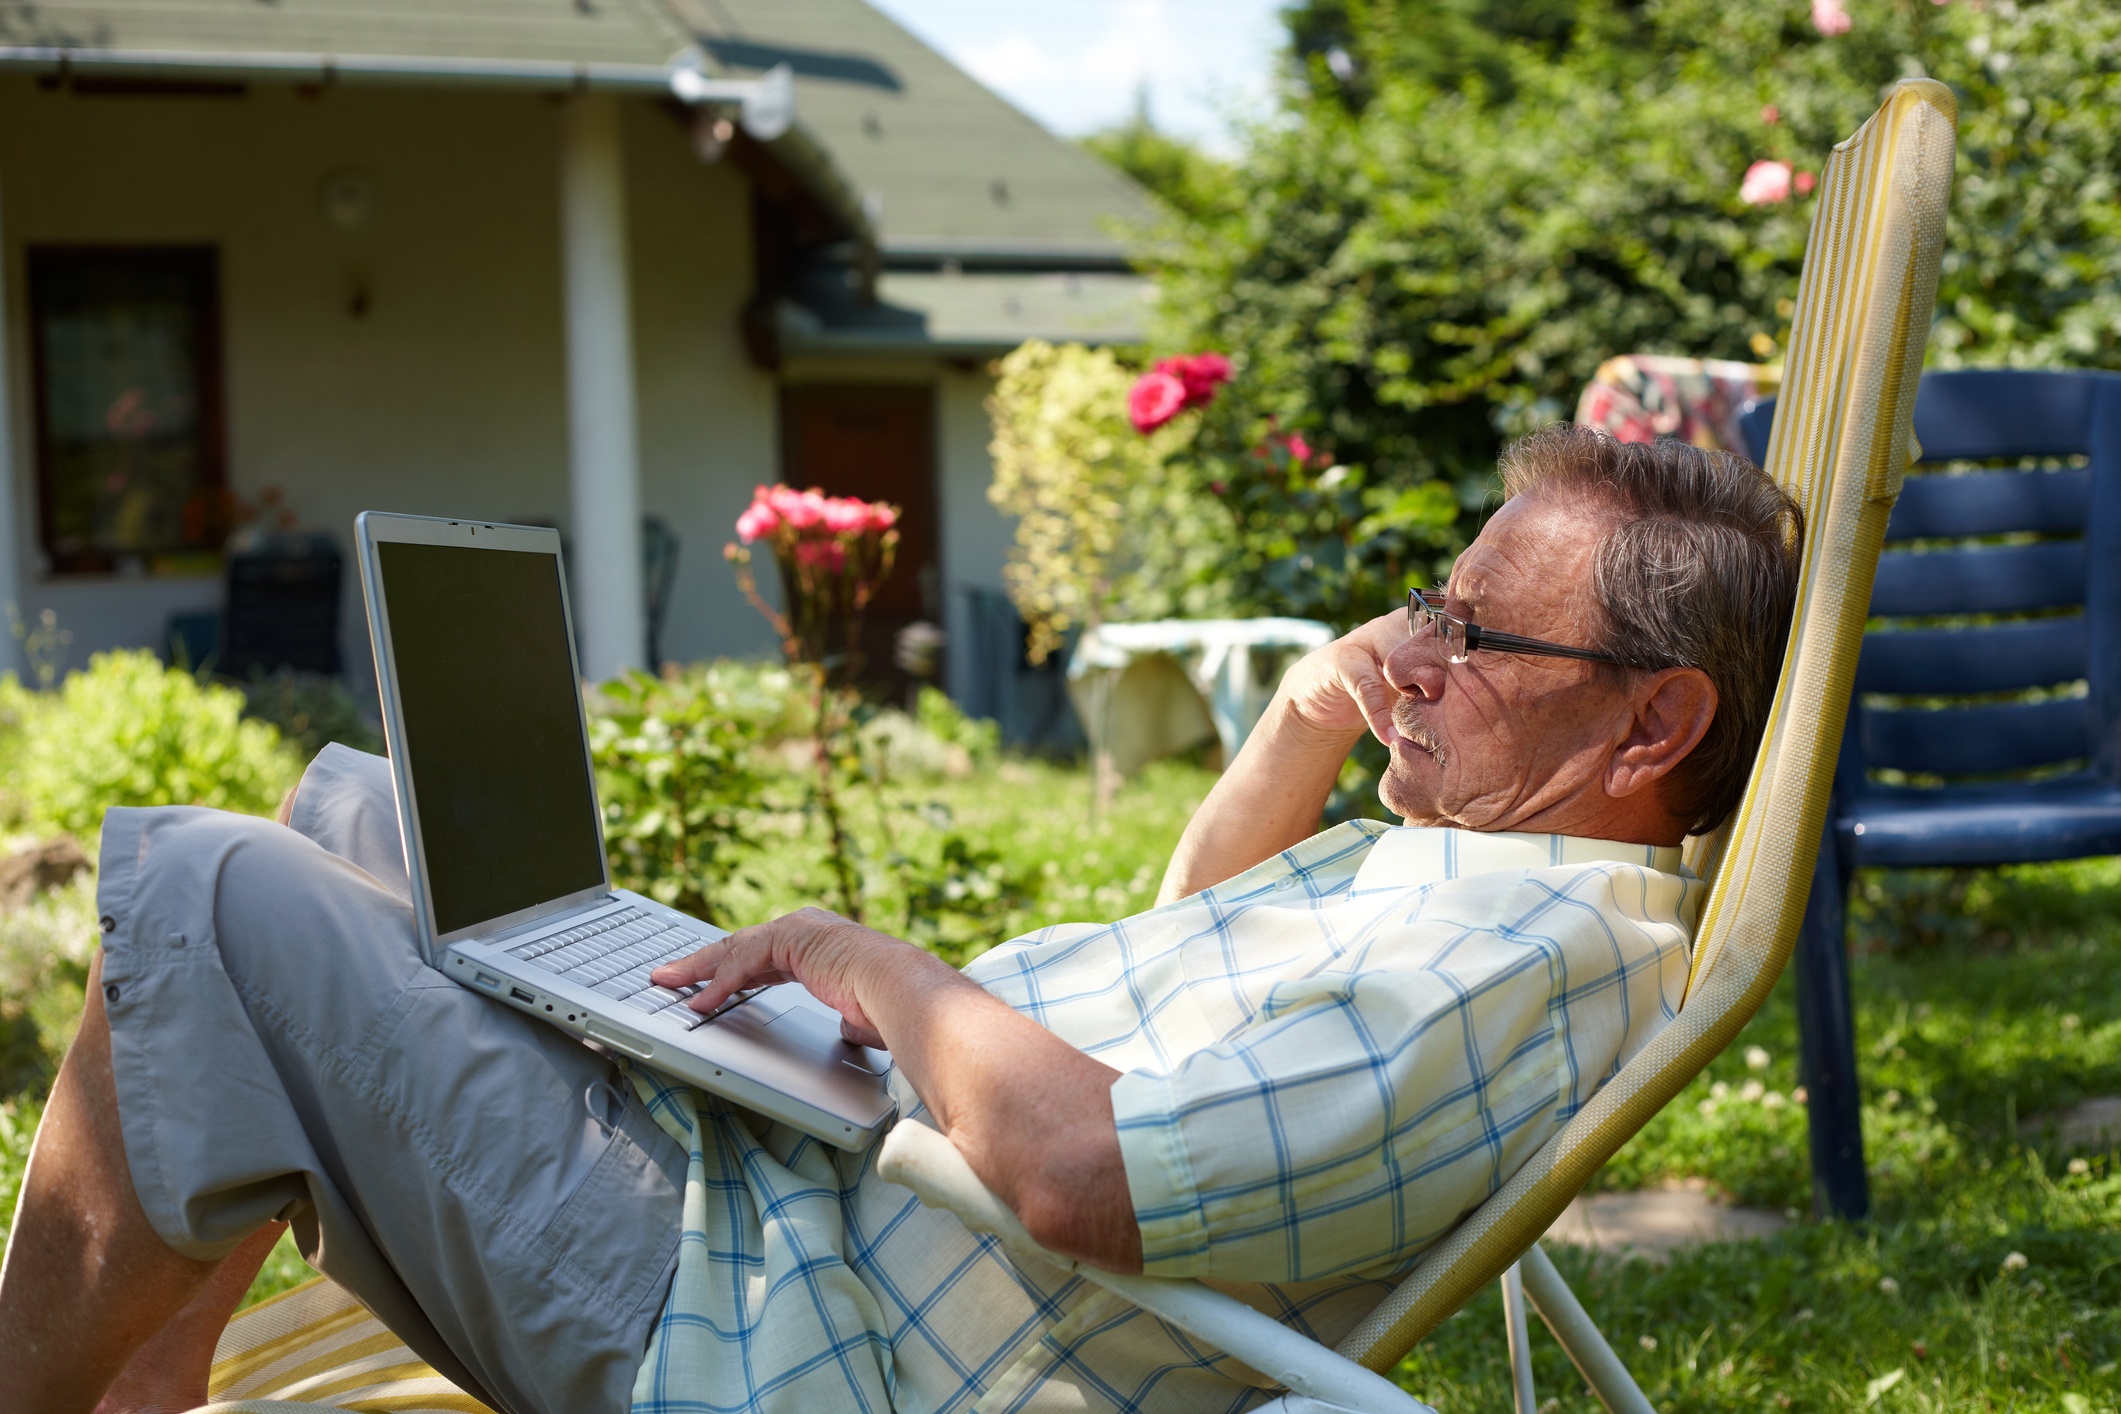 Allow boomers to work from home and provide work-life balance